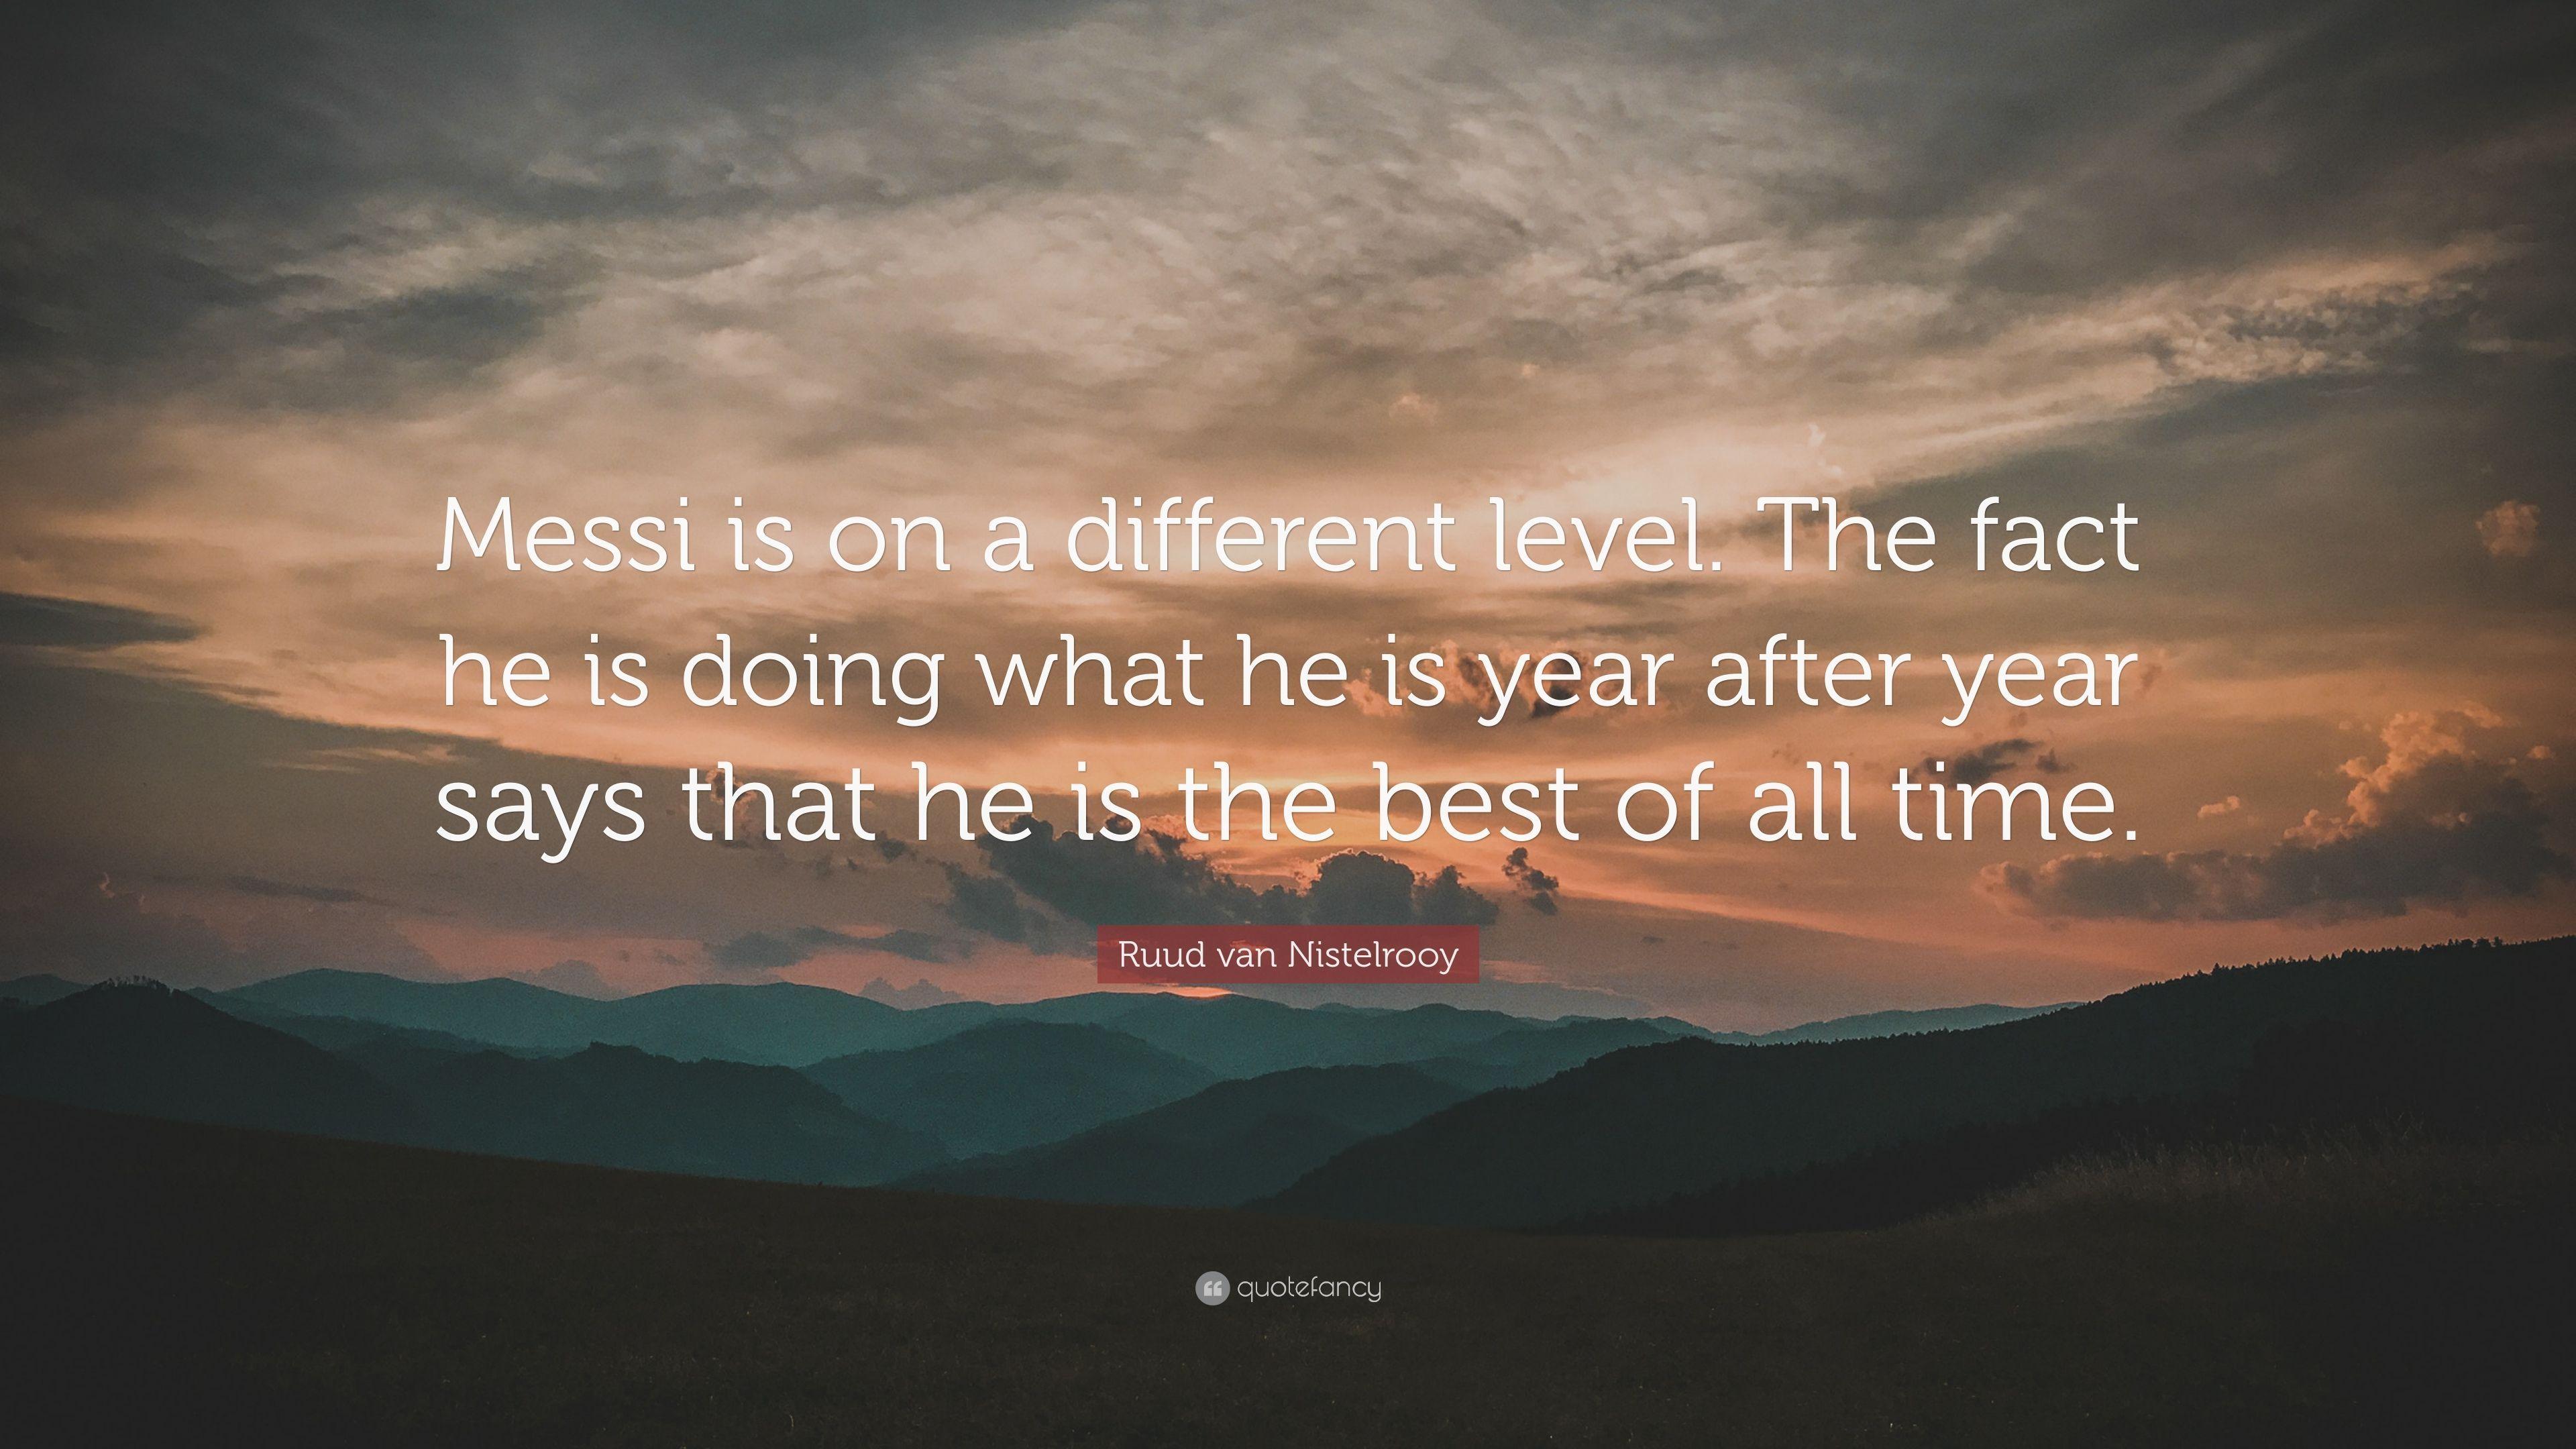 Ruud van Nistelrooy Quote: “Messi is on a different level. The fact